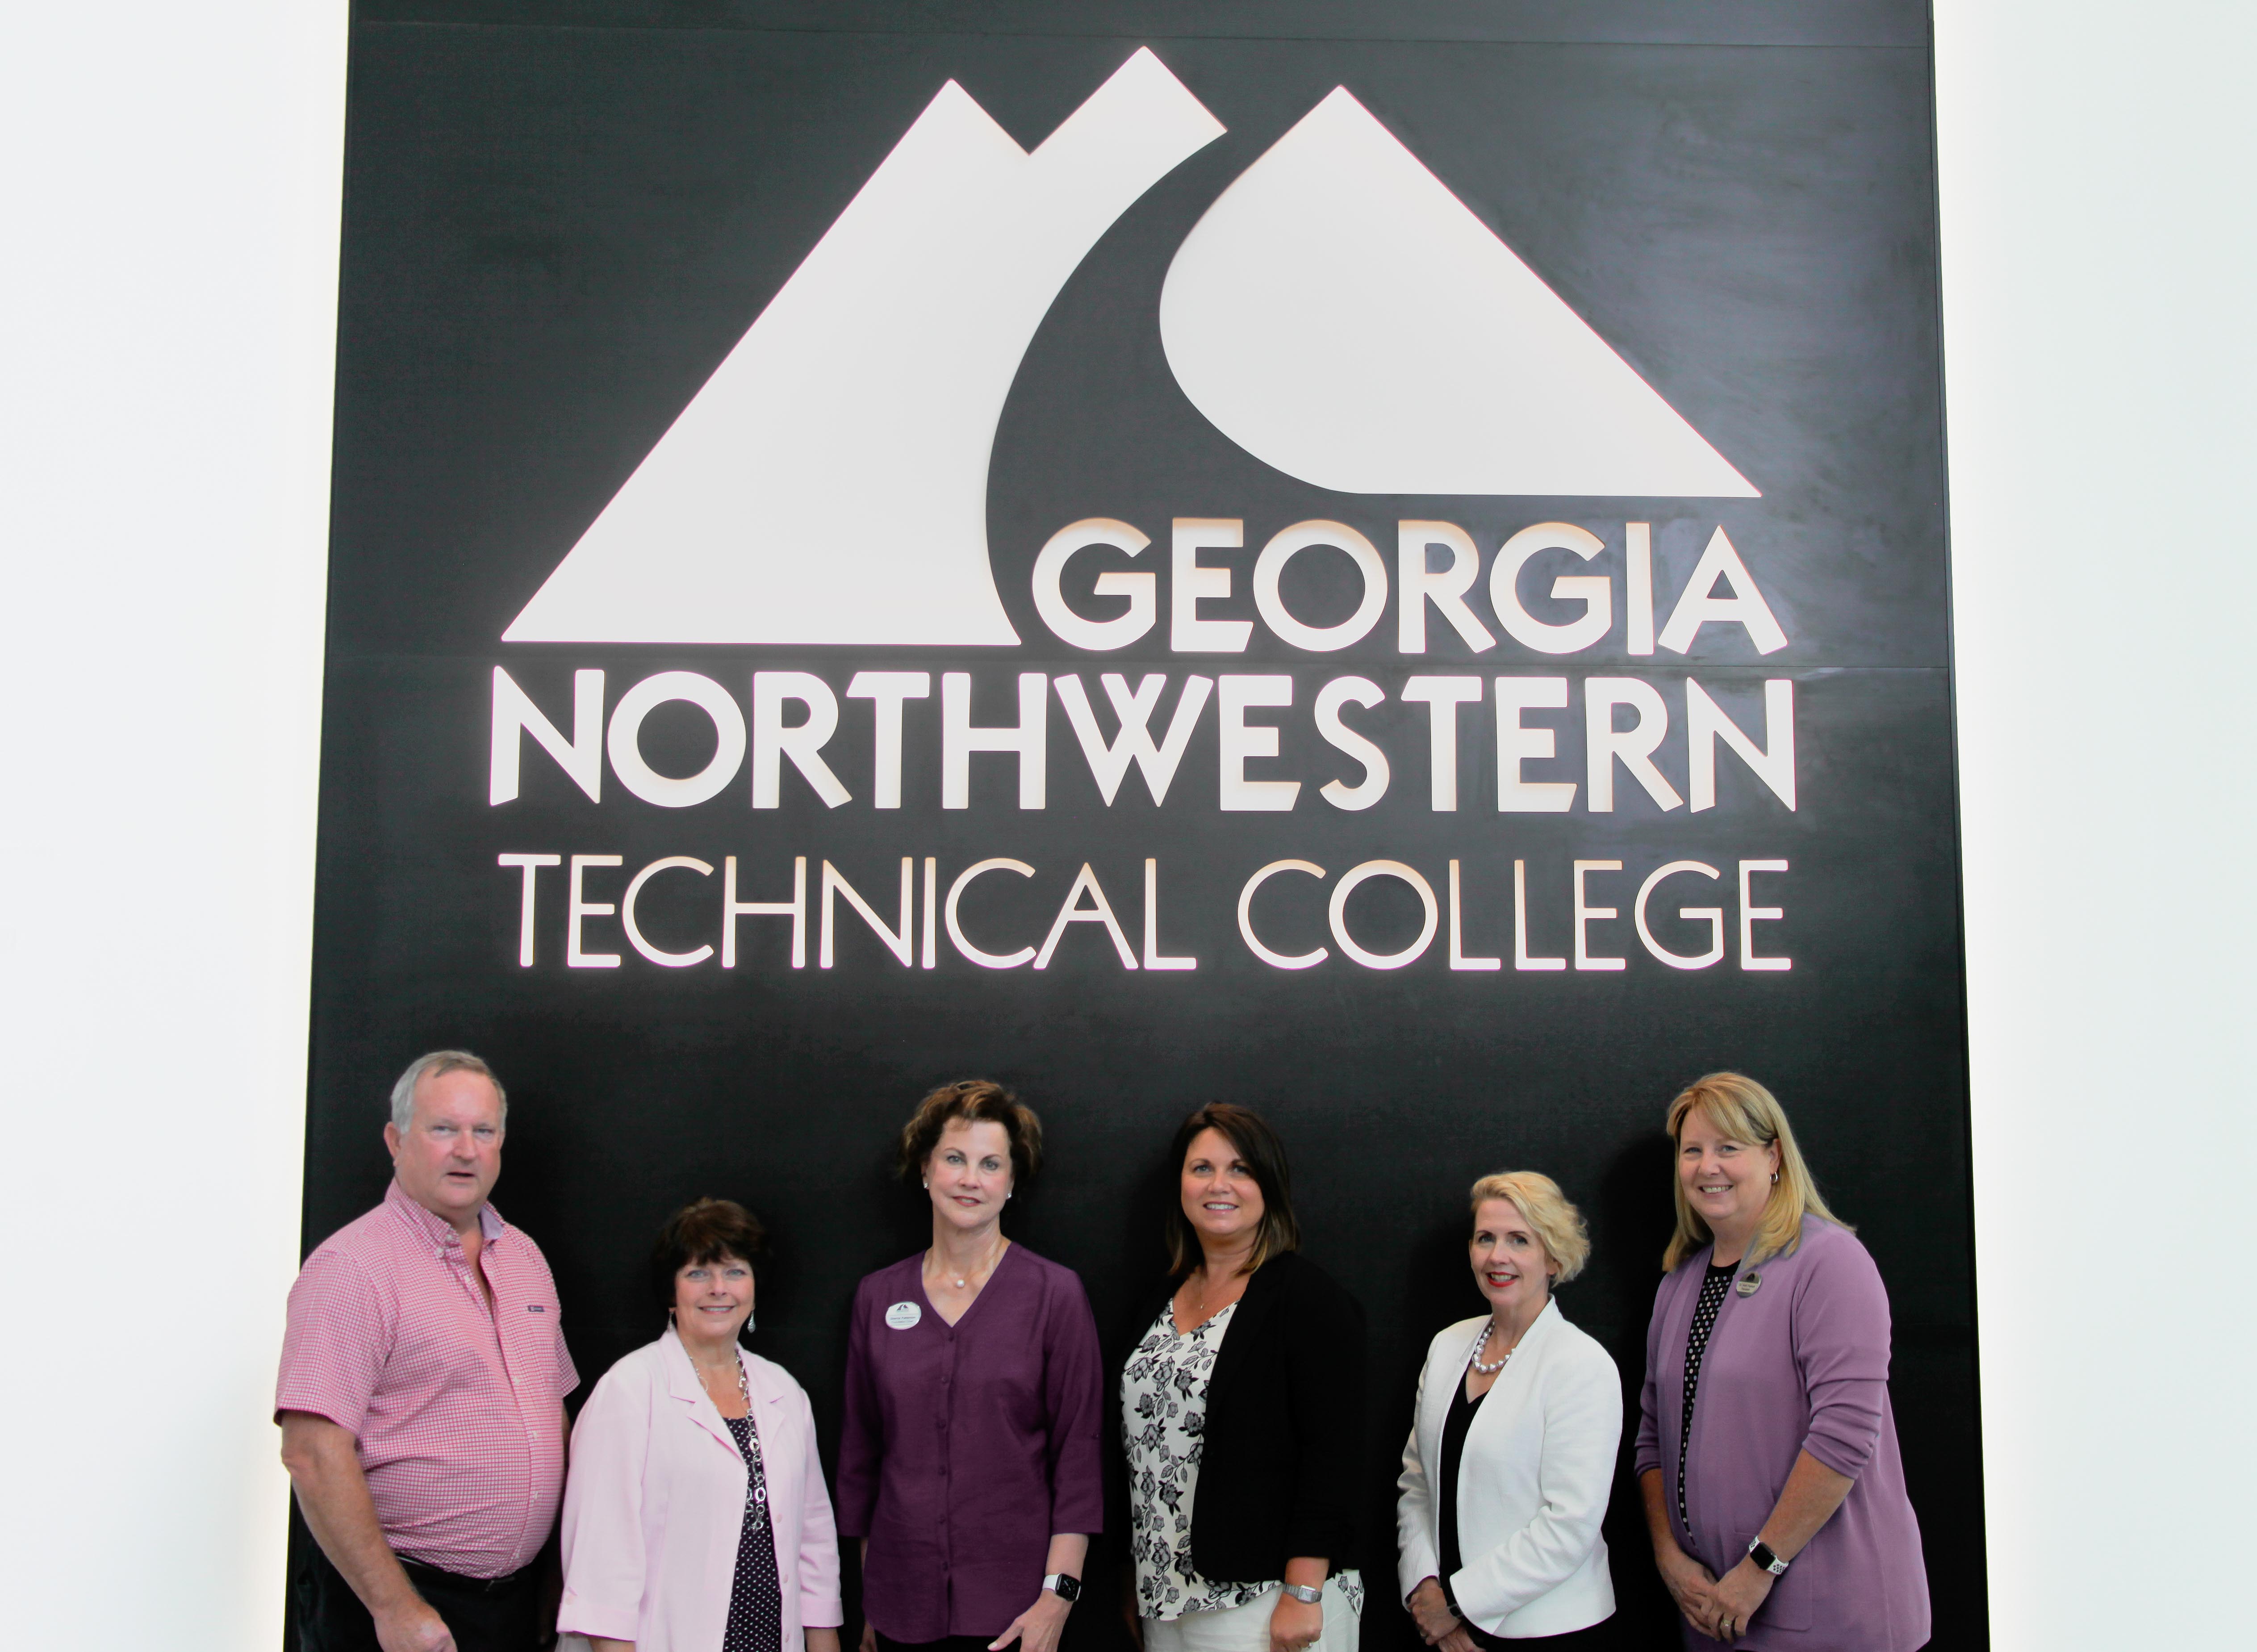 (From left to right) Paul Meredith, member of GNTC’s Board of Directors and Mohawk senior technical director; Linda McEntire, Mohawk director of technical training; Sherrie Patterson, chair of the GNTC Foundation Trustees; Becky Redd, GNTC Foundation Trustee and Mohawk senior HR director of talent management; Lauretta Hannon, GNTC director of Institutional Advancement; and GNTC President Dr. Heidi Popham.